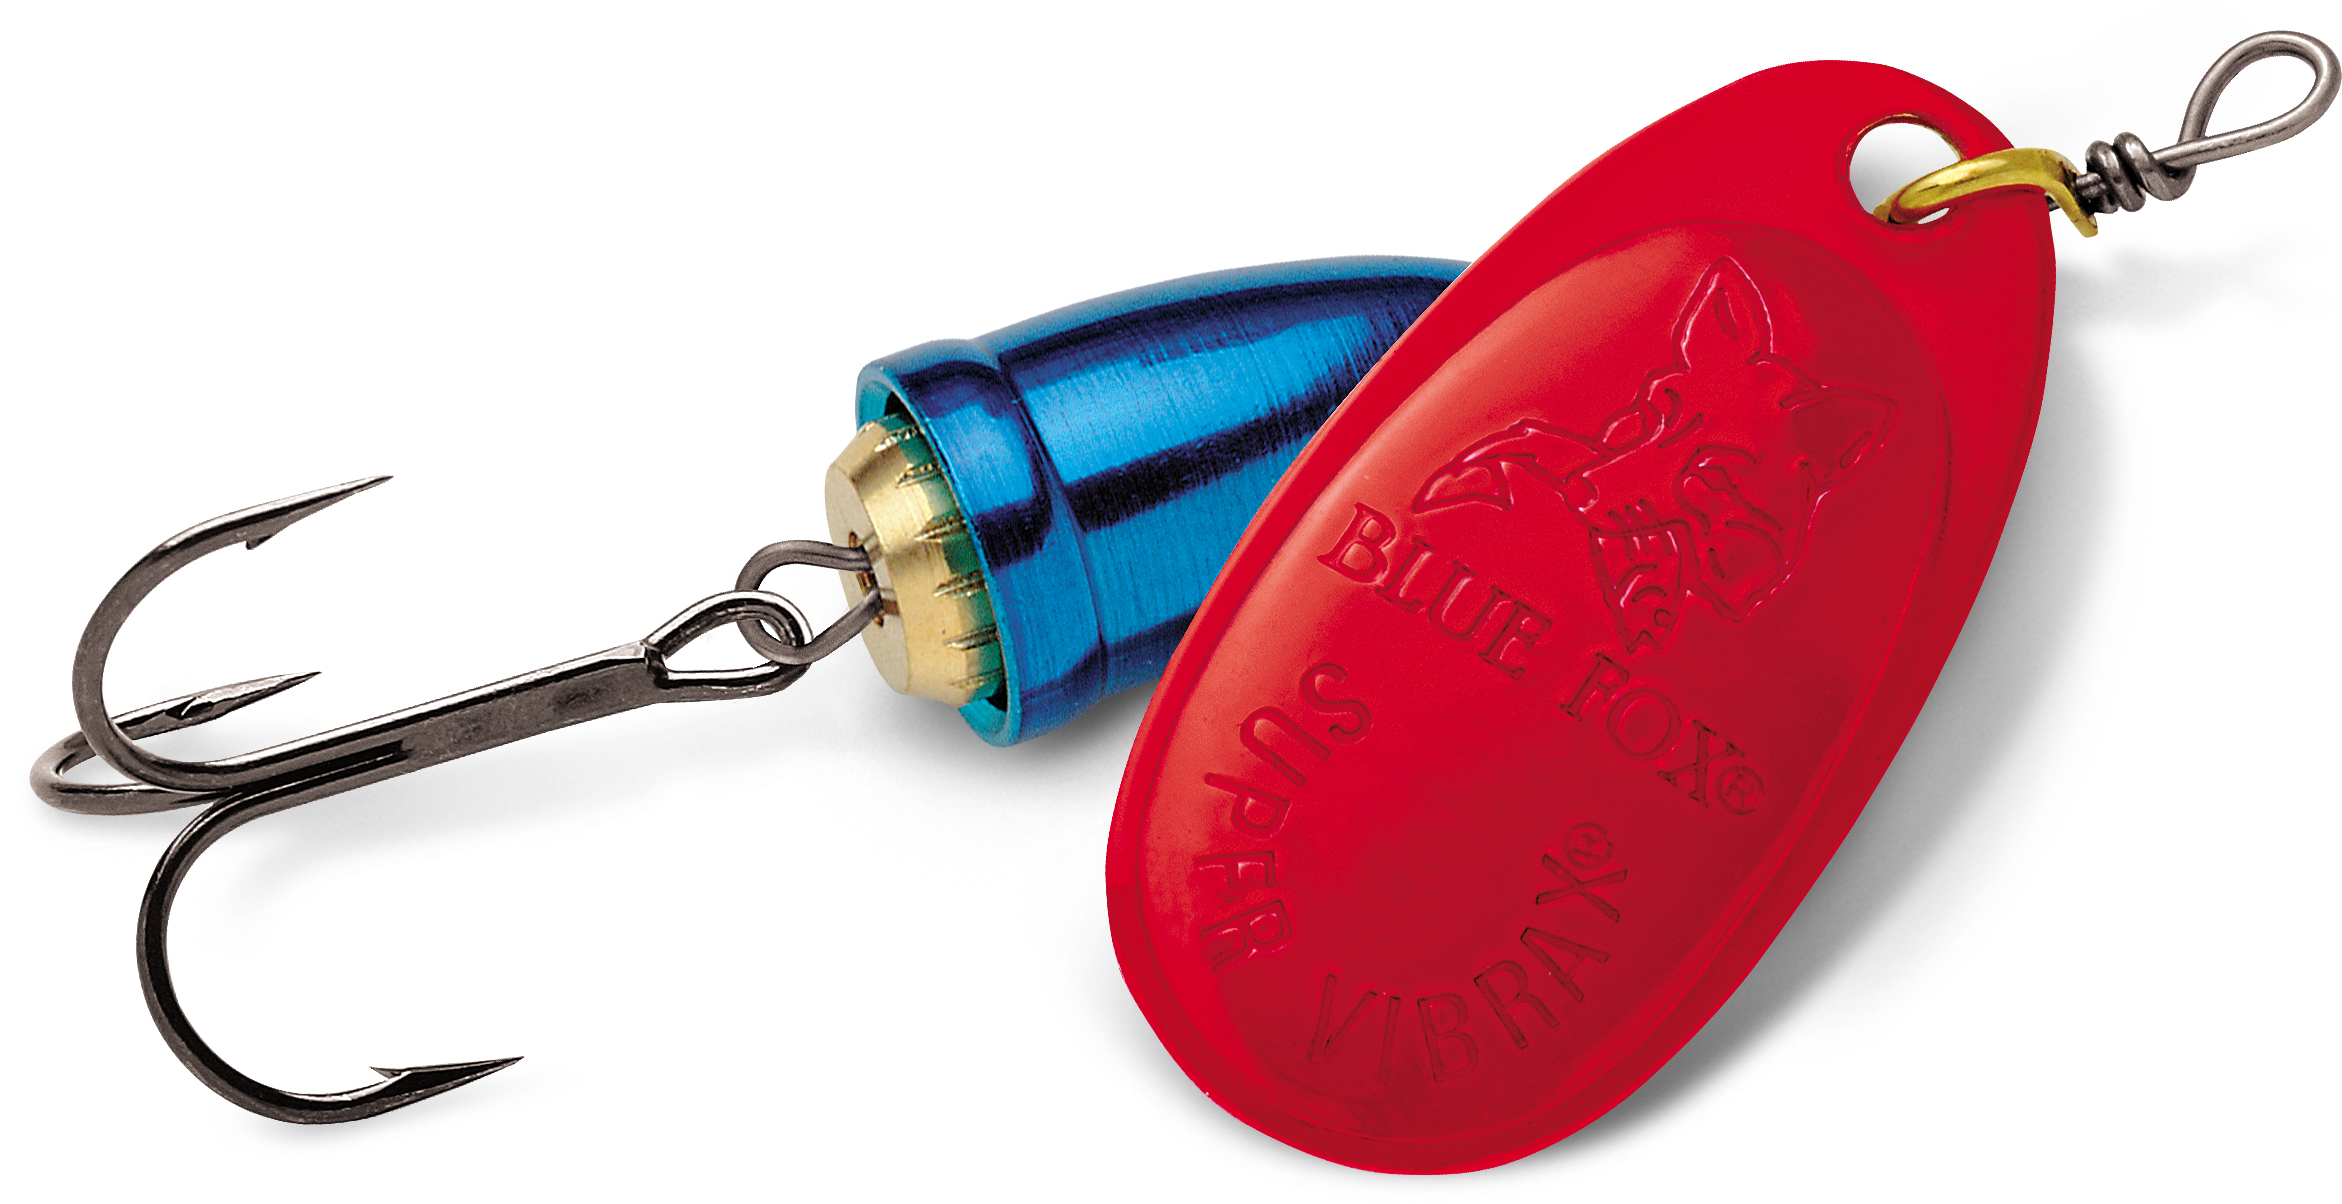 Blue Fox Classic Vibrax Size 5 Inline Spinner 7/16oz Silver/Flo Red 